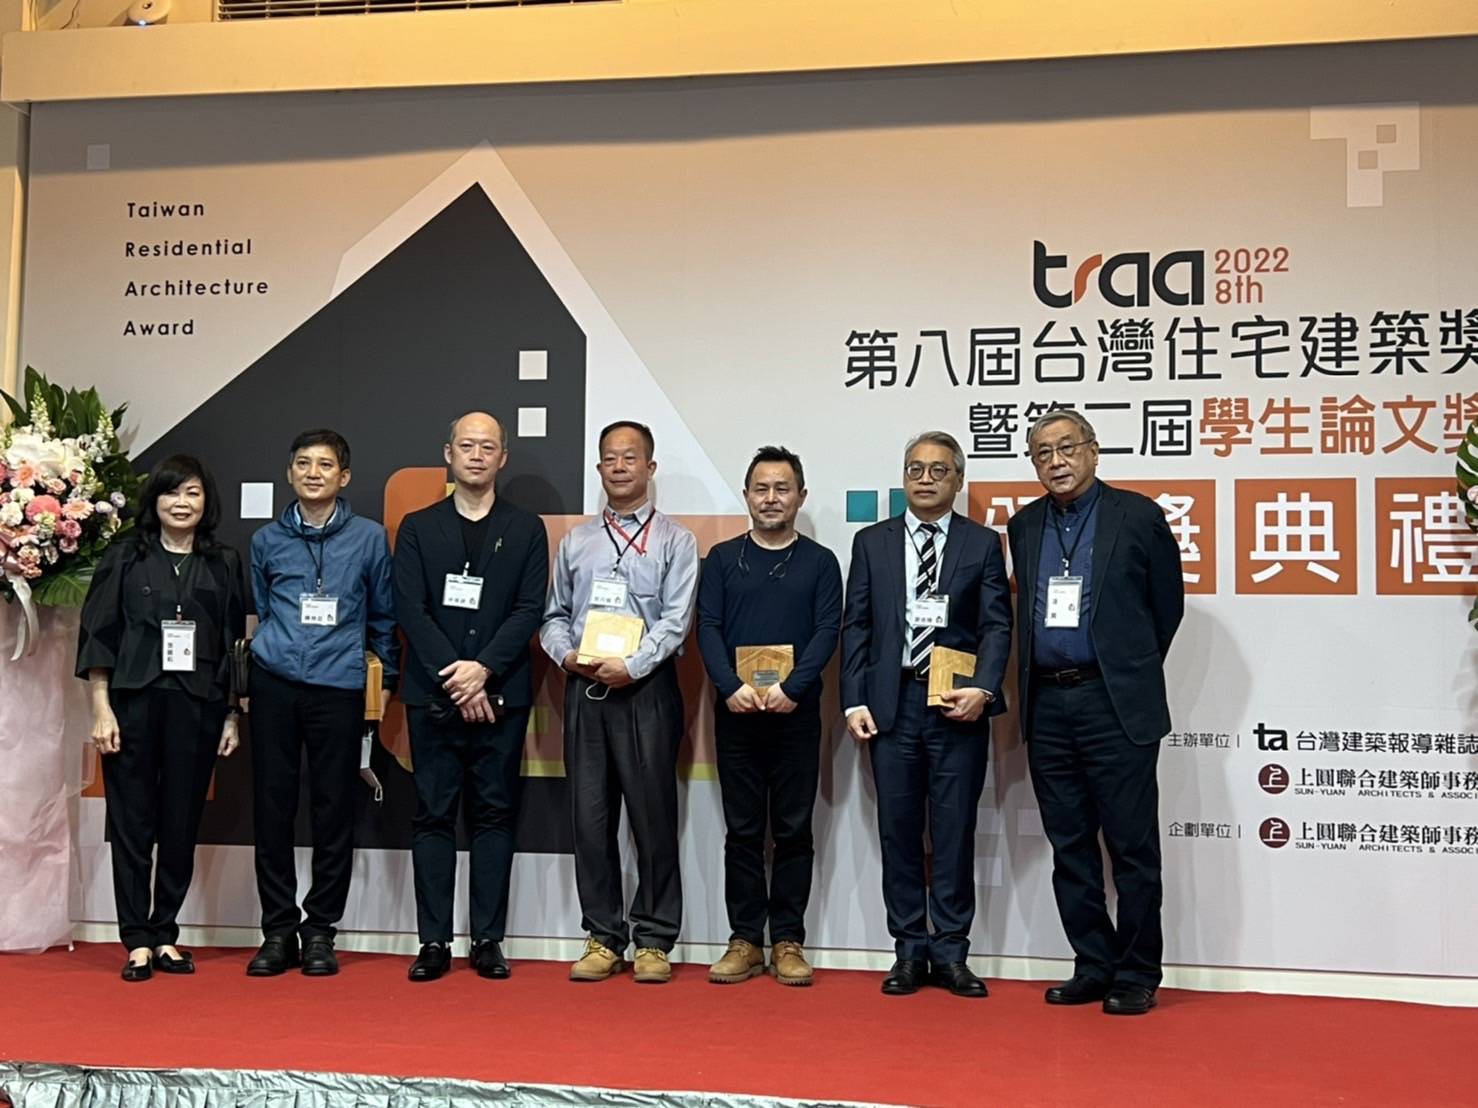 First Place for Best Residential Complex, the 8th Taiwan Residential Architecture Award (TRAA).